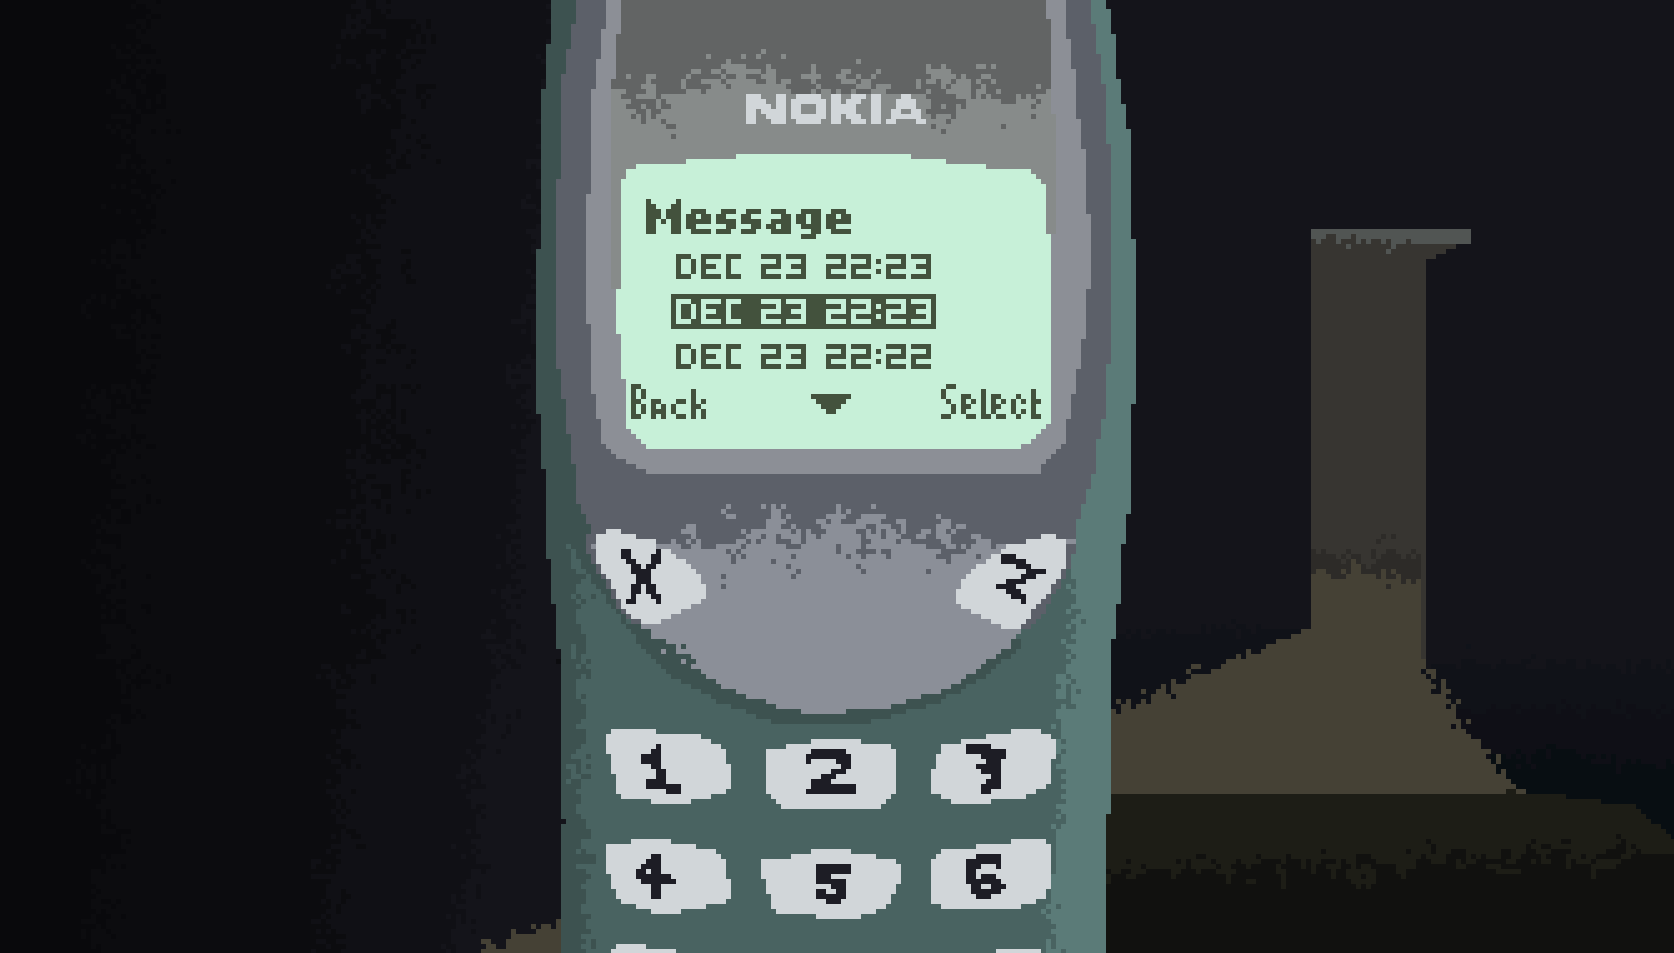 Can't wait for Snake on the Nokia 3310? Here's how to play the